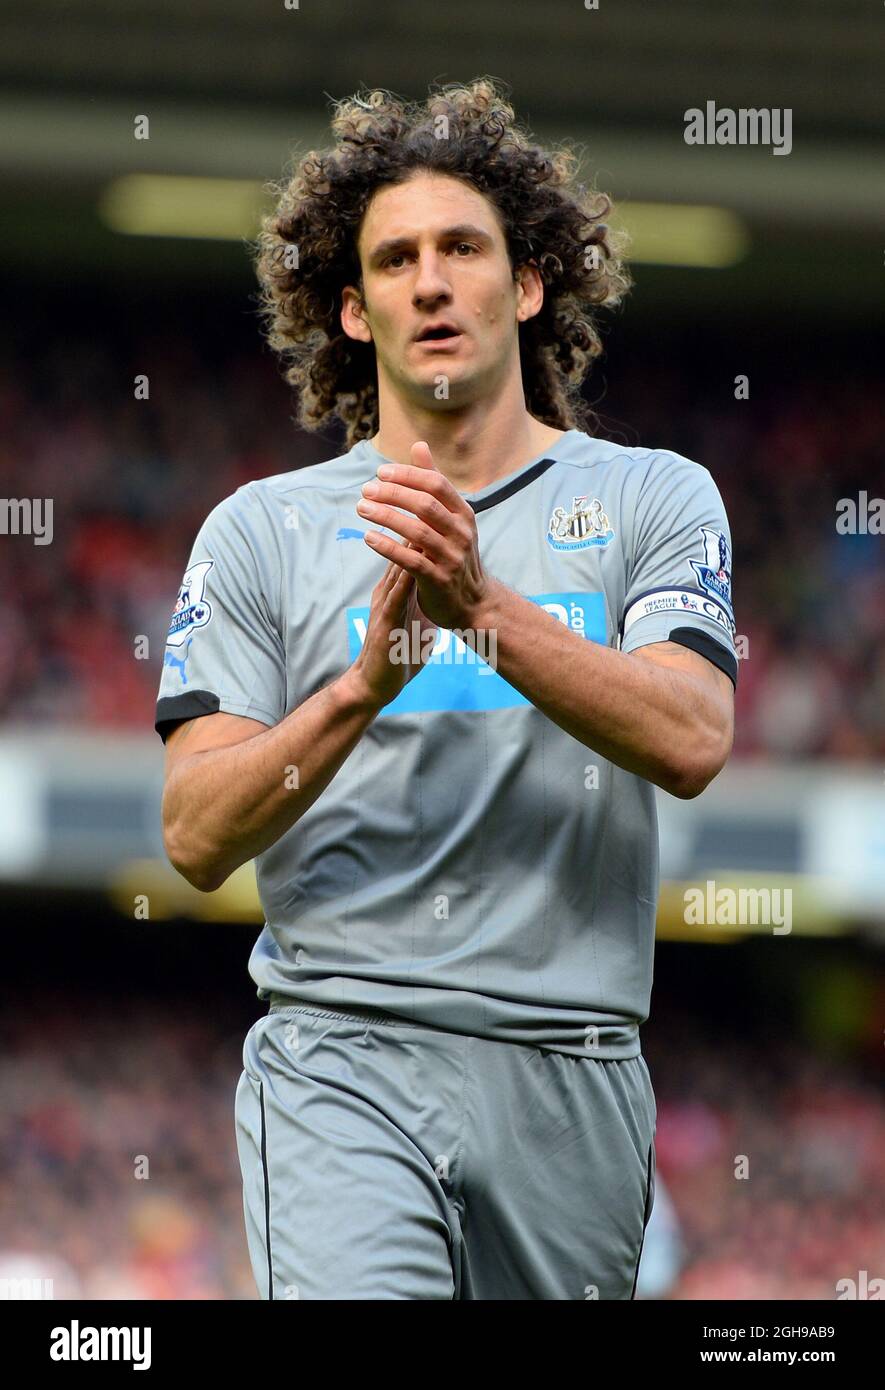 Fabricio Coloccini of Newcastle United during Barclays Premier League match between Liverpool and Newcastle United at Anfield in Liverpool, United Kingdom on May 11, 2014. Pic Simon Bellis. Stock Photo